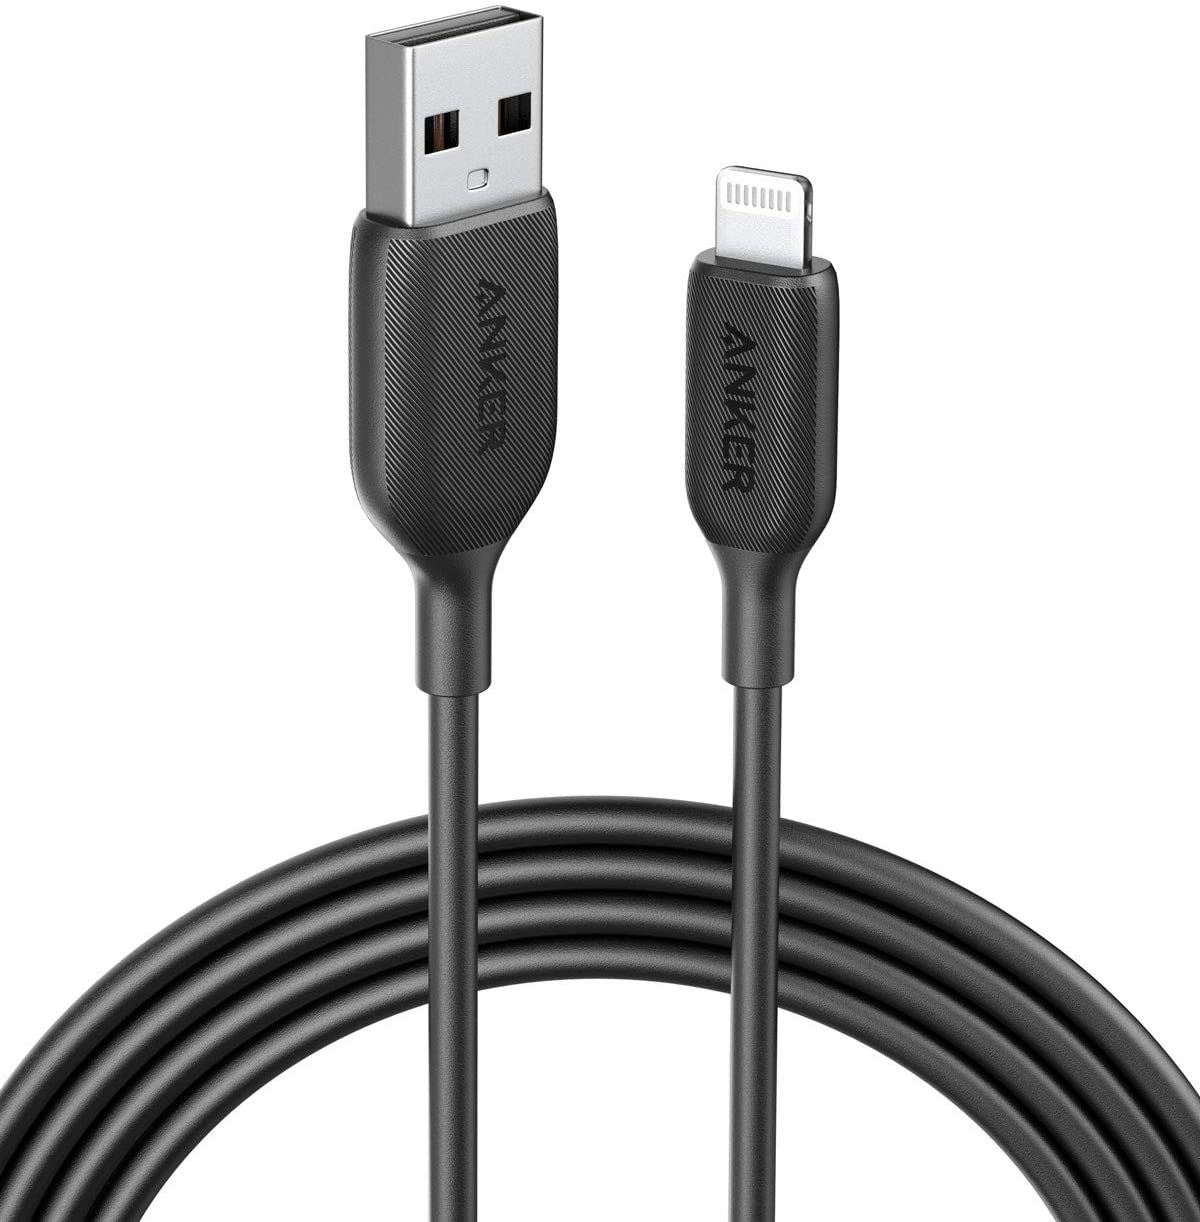 Anker Powerline III Lightning Cable 6 ft